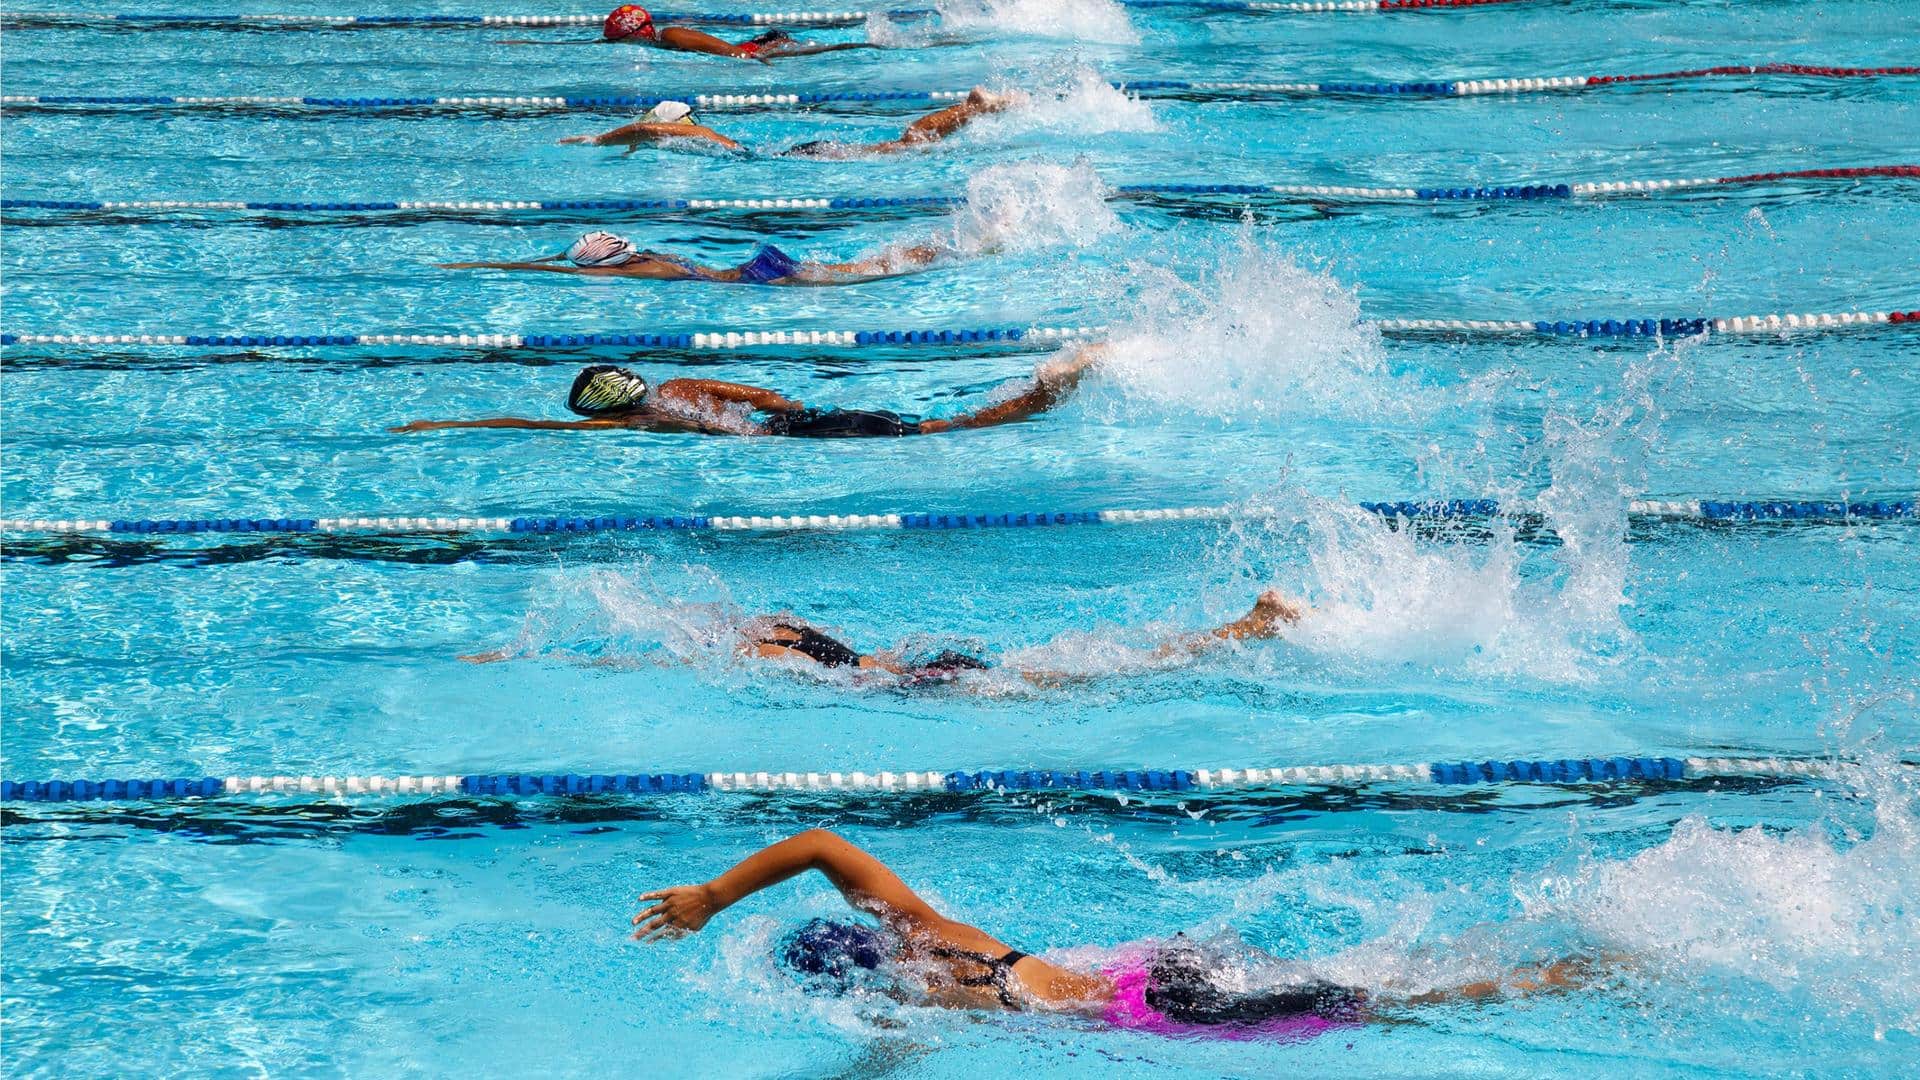 Swimming etiquette: Rules for sharing a public pool